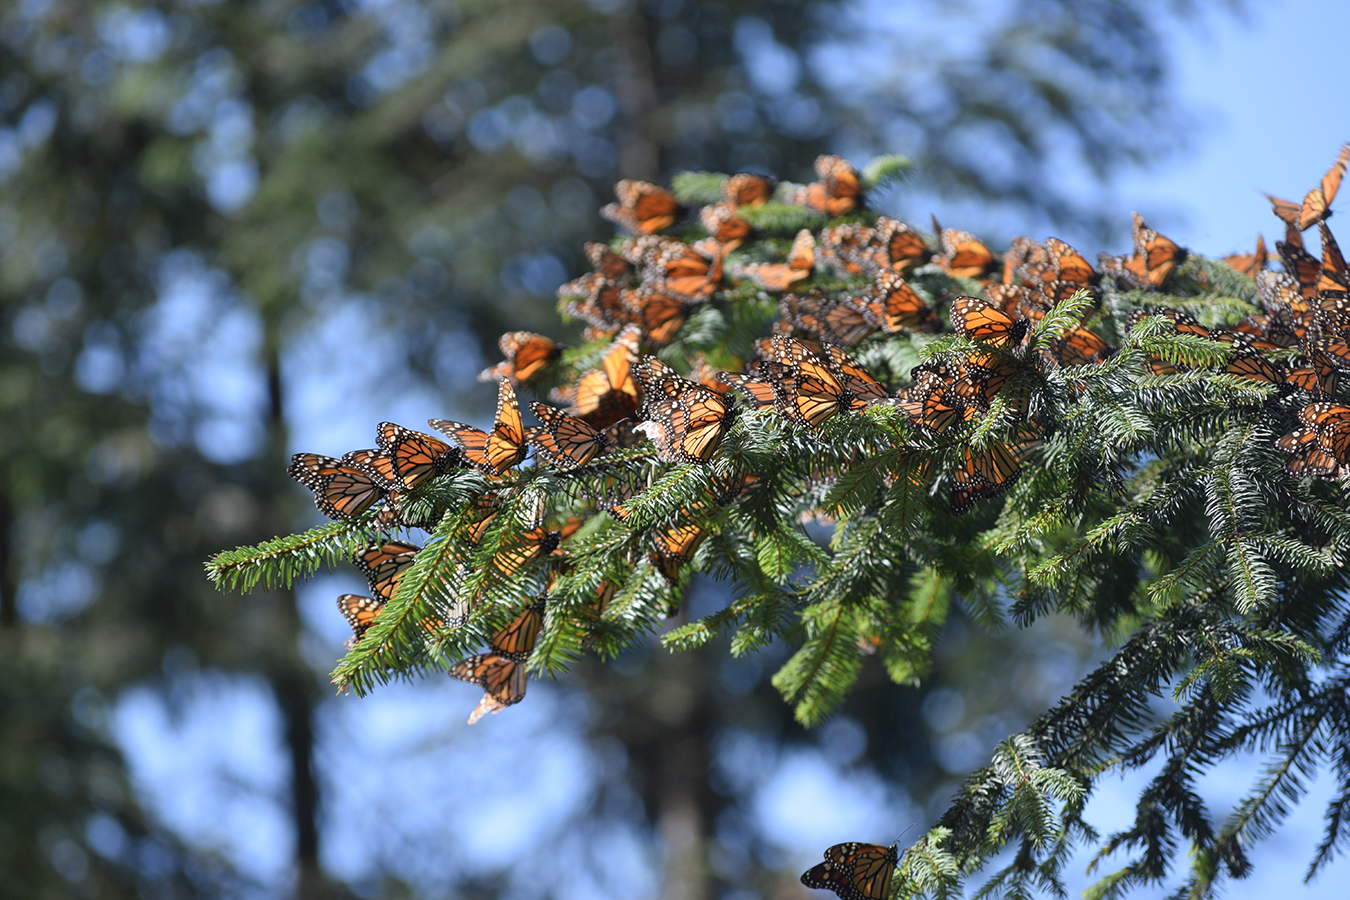 Monarchs cluster on an evergreen tree branch.